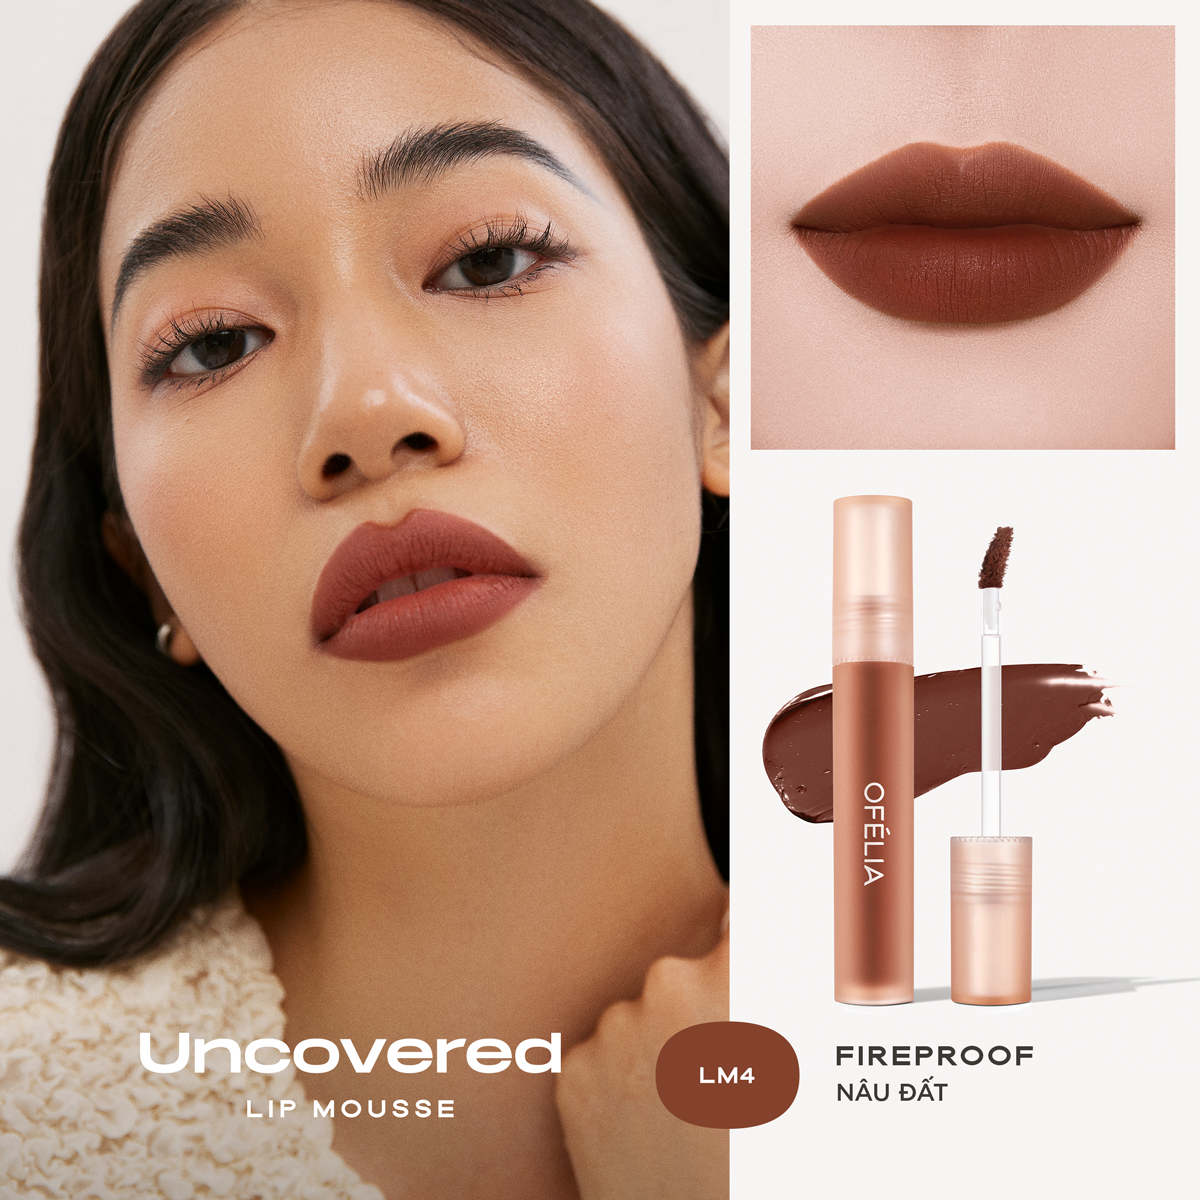 SET 2 UNCOVERED LIP MOUSSE CHAPTER 01